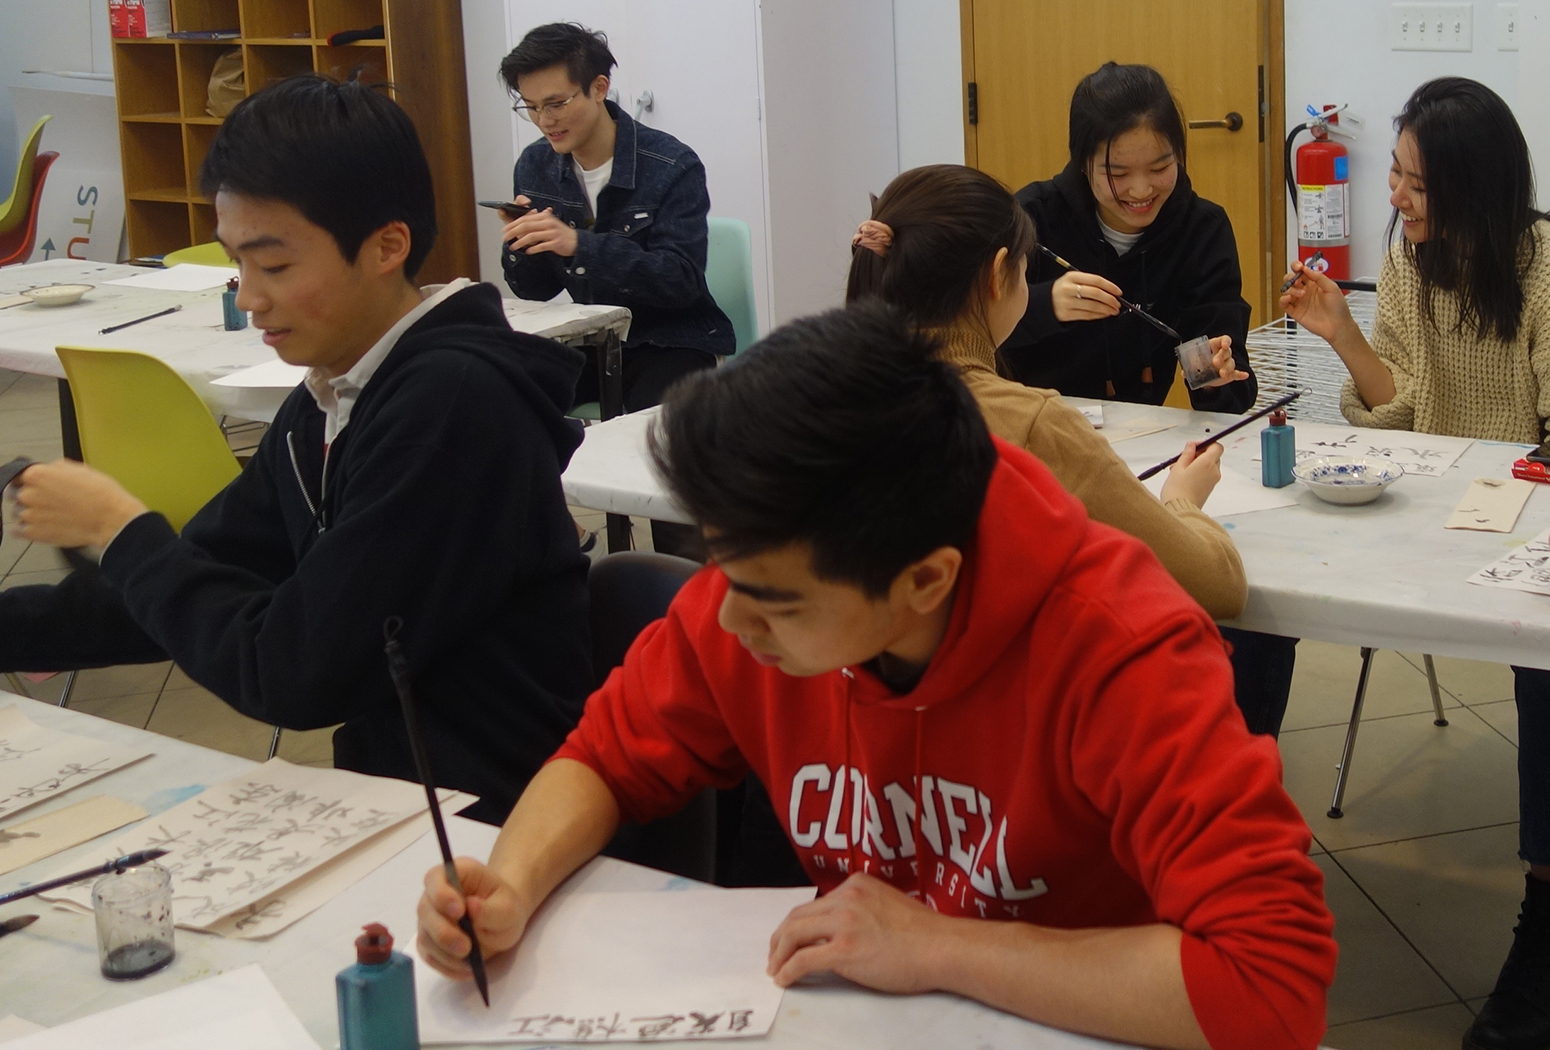 A group of college students learn Chinese calligraphy in an art studio workshop